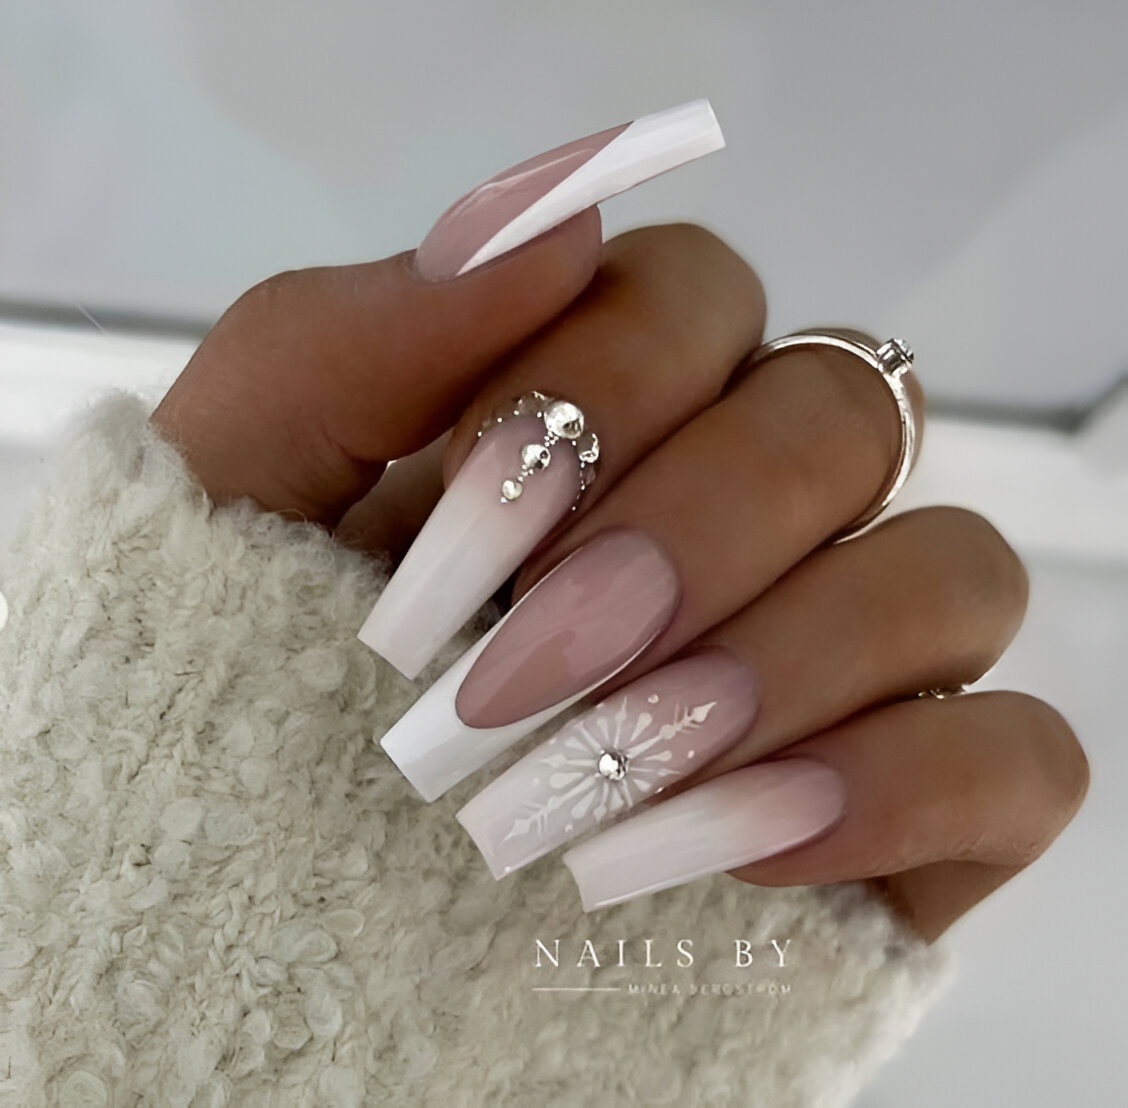 Icy White Nails